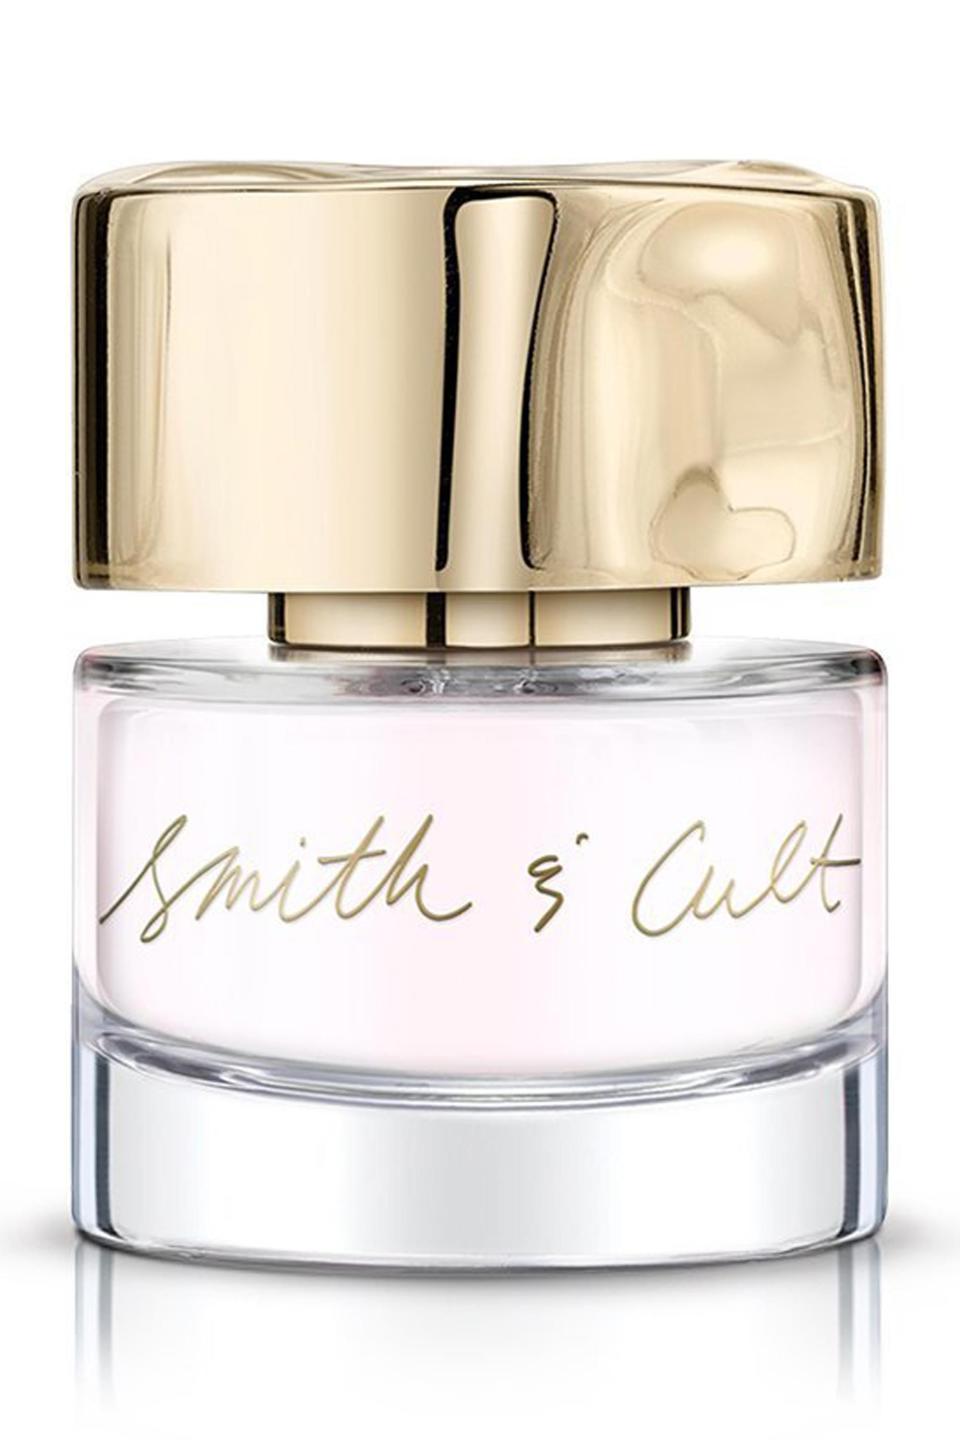 26) Smith & Cult Nail Lacquer in Regret the Moon